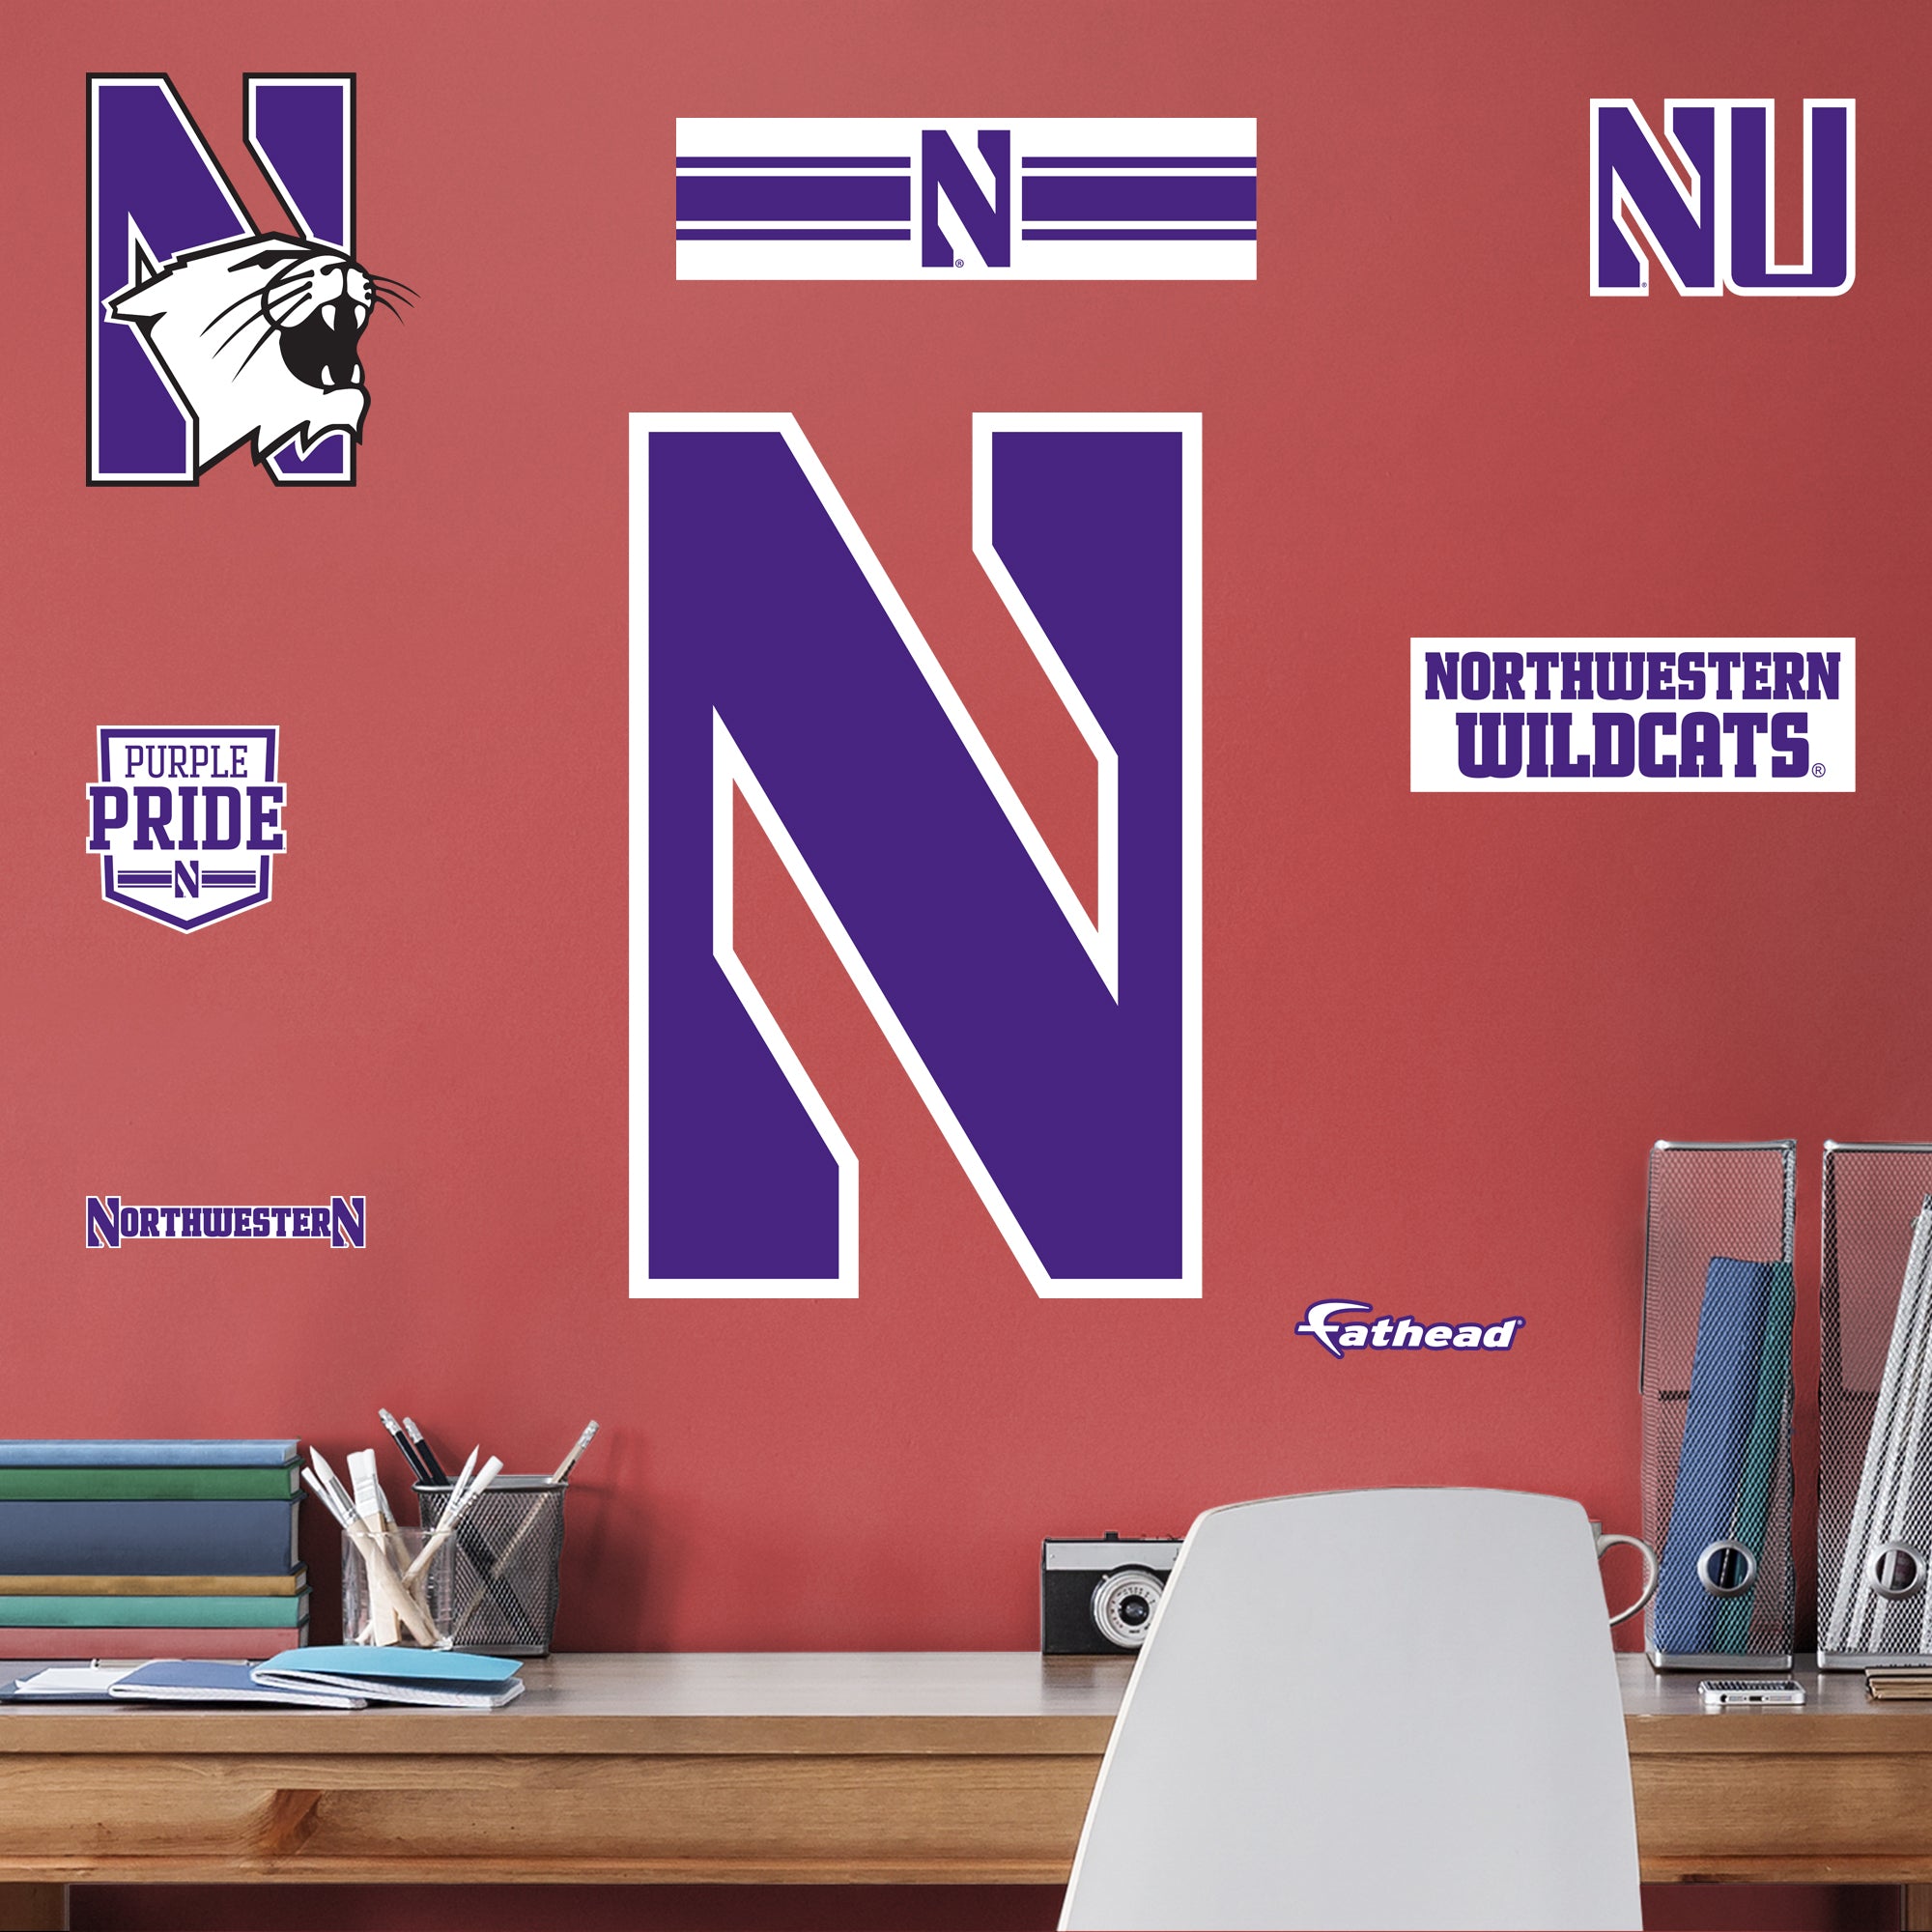 Northwestern Wildcats Logo - Officially Licensed Removable Wall Decal Giant Decal (25"W x 38.5"H) by Fathead | Vinyl